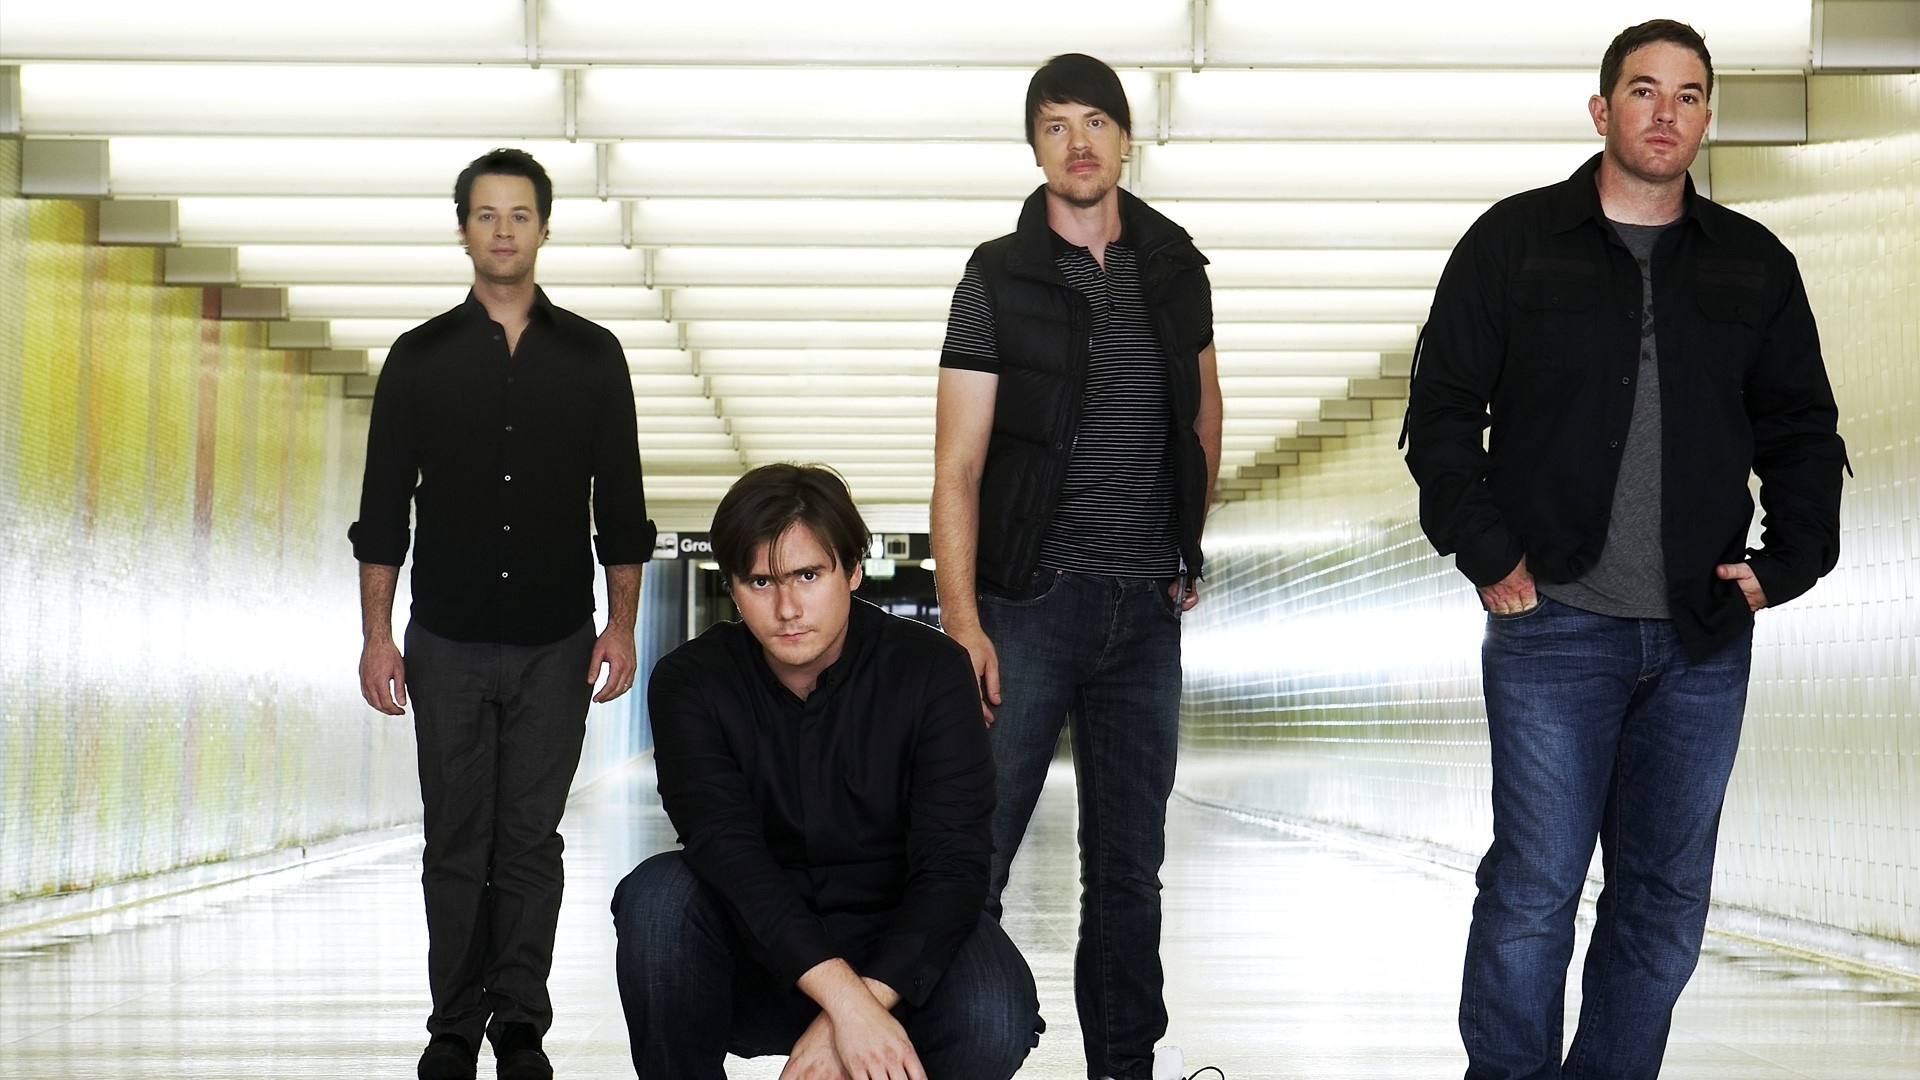 Jimmy Eat World Wallpapers posted by Samantha Anderson 1920x1080